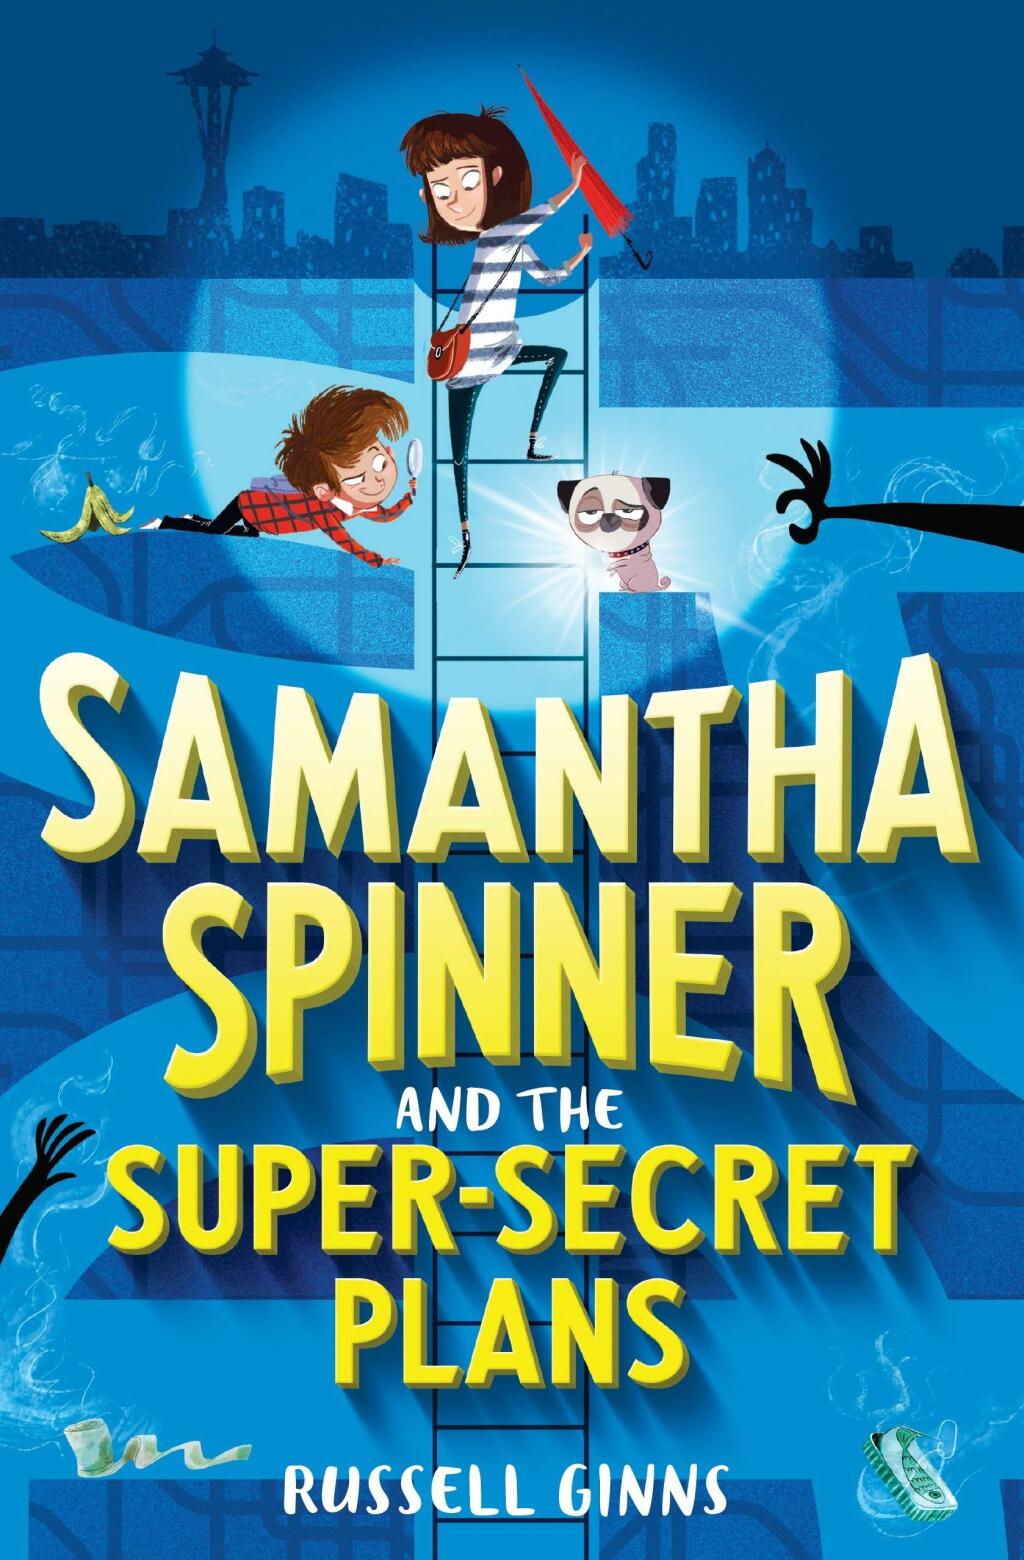 'Samantha' spins her way to the top spot on this week's Top 10 books List.